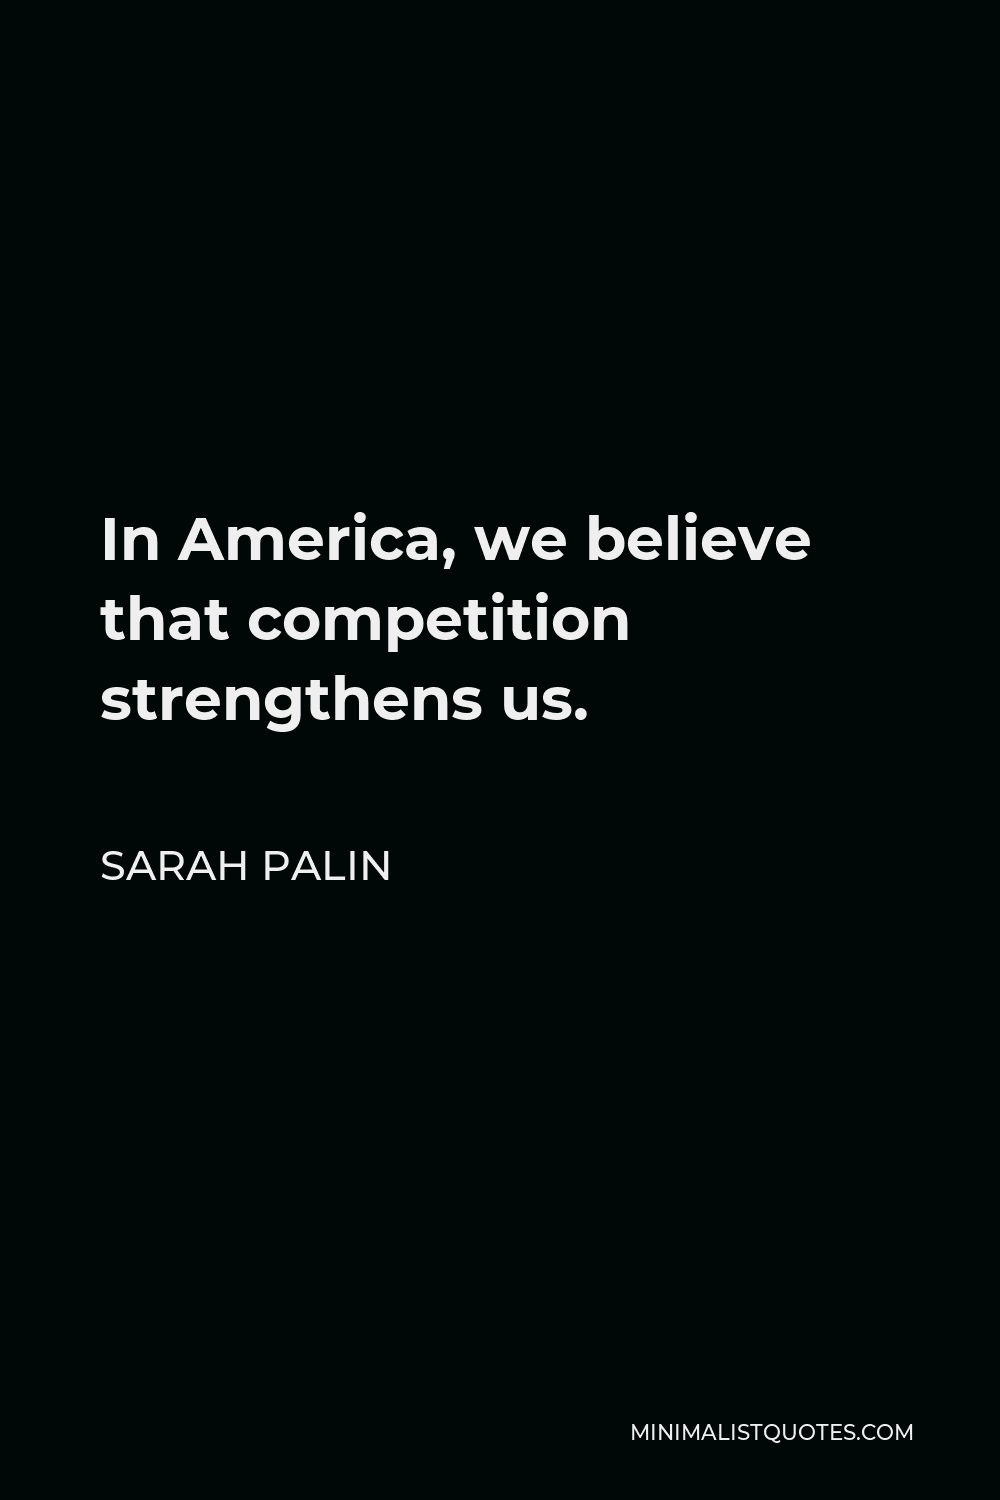 Sarah Palin Quote - In America, we believe that competition strengthens us.